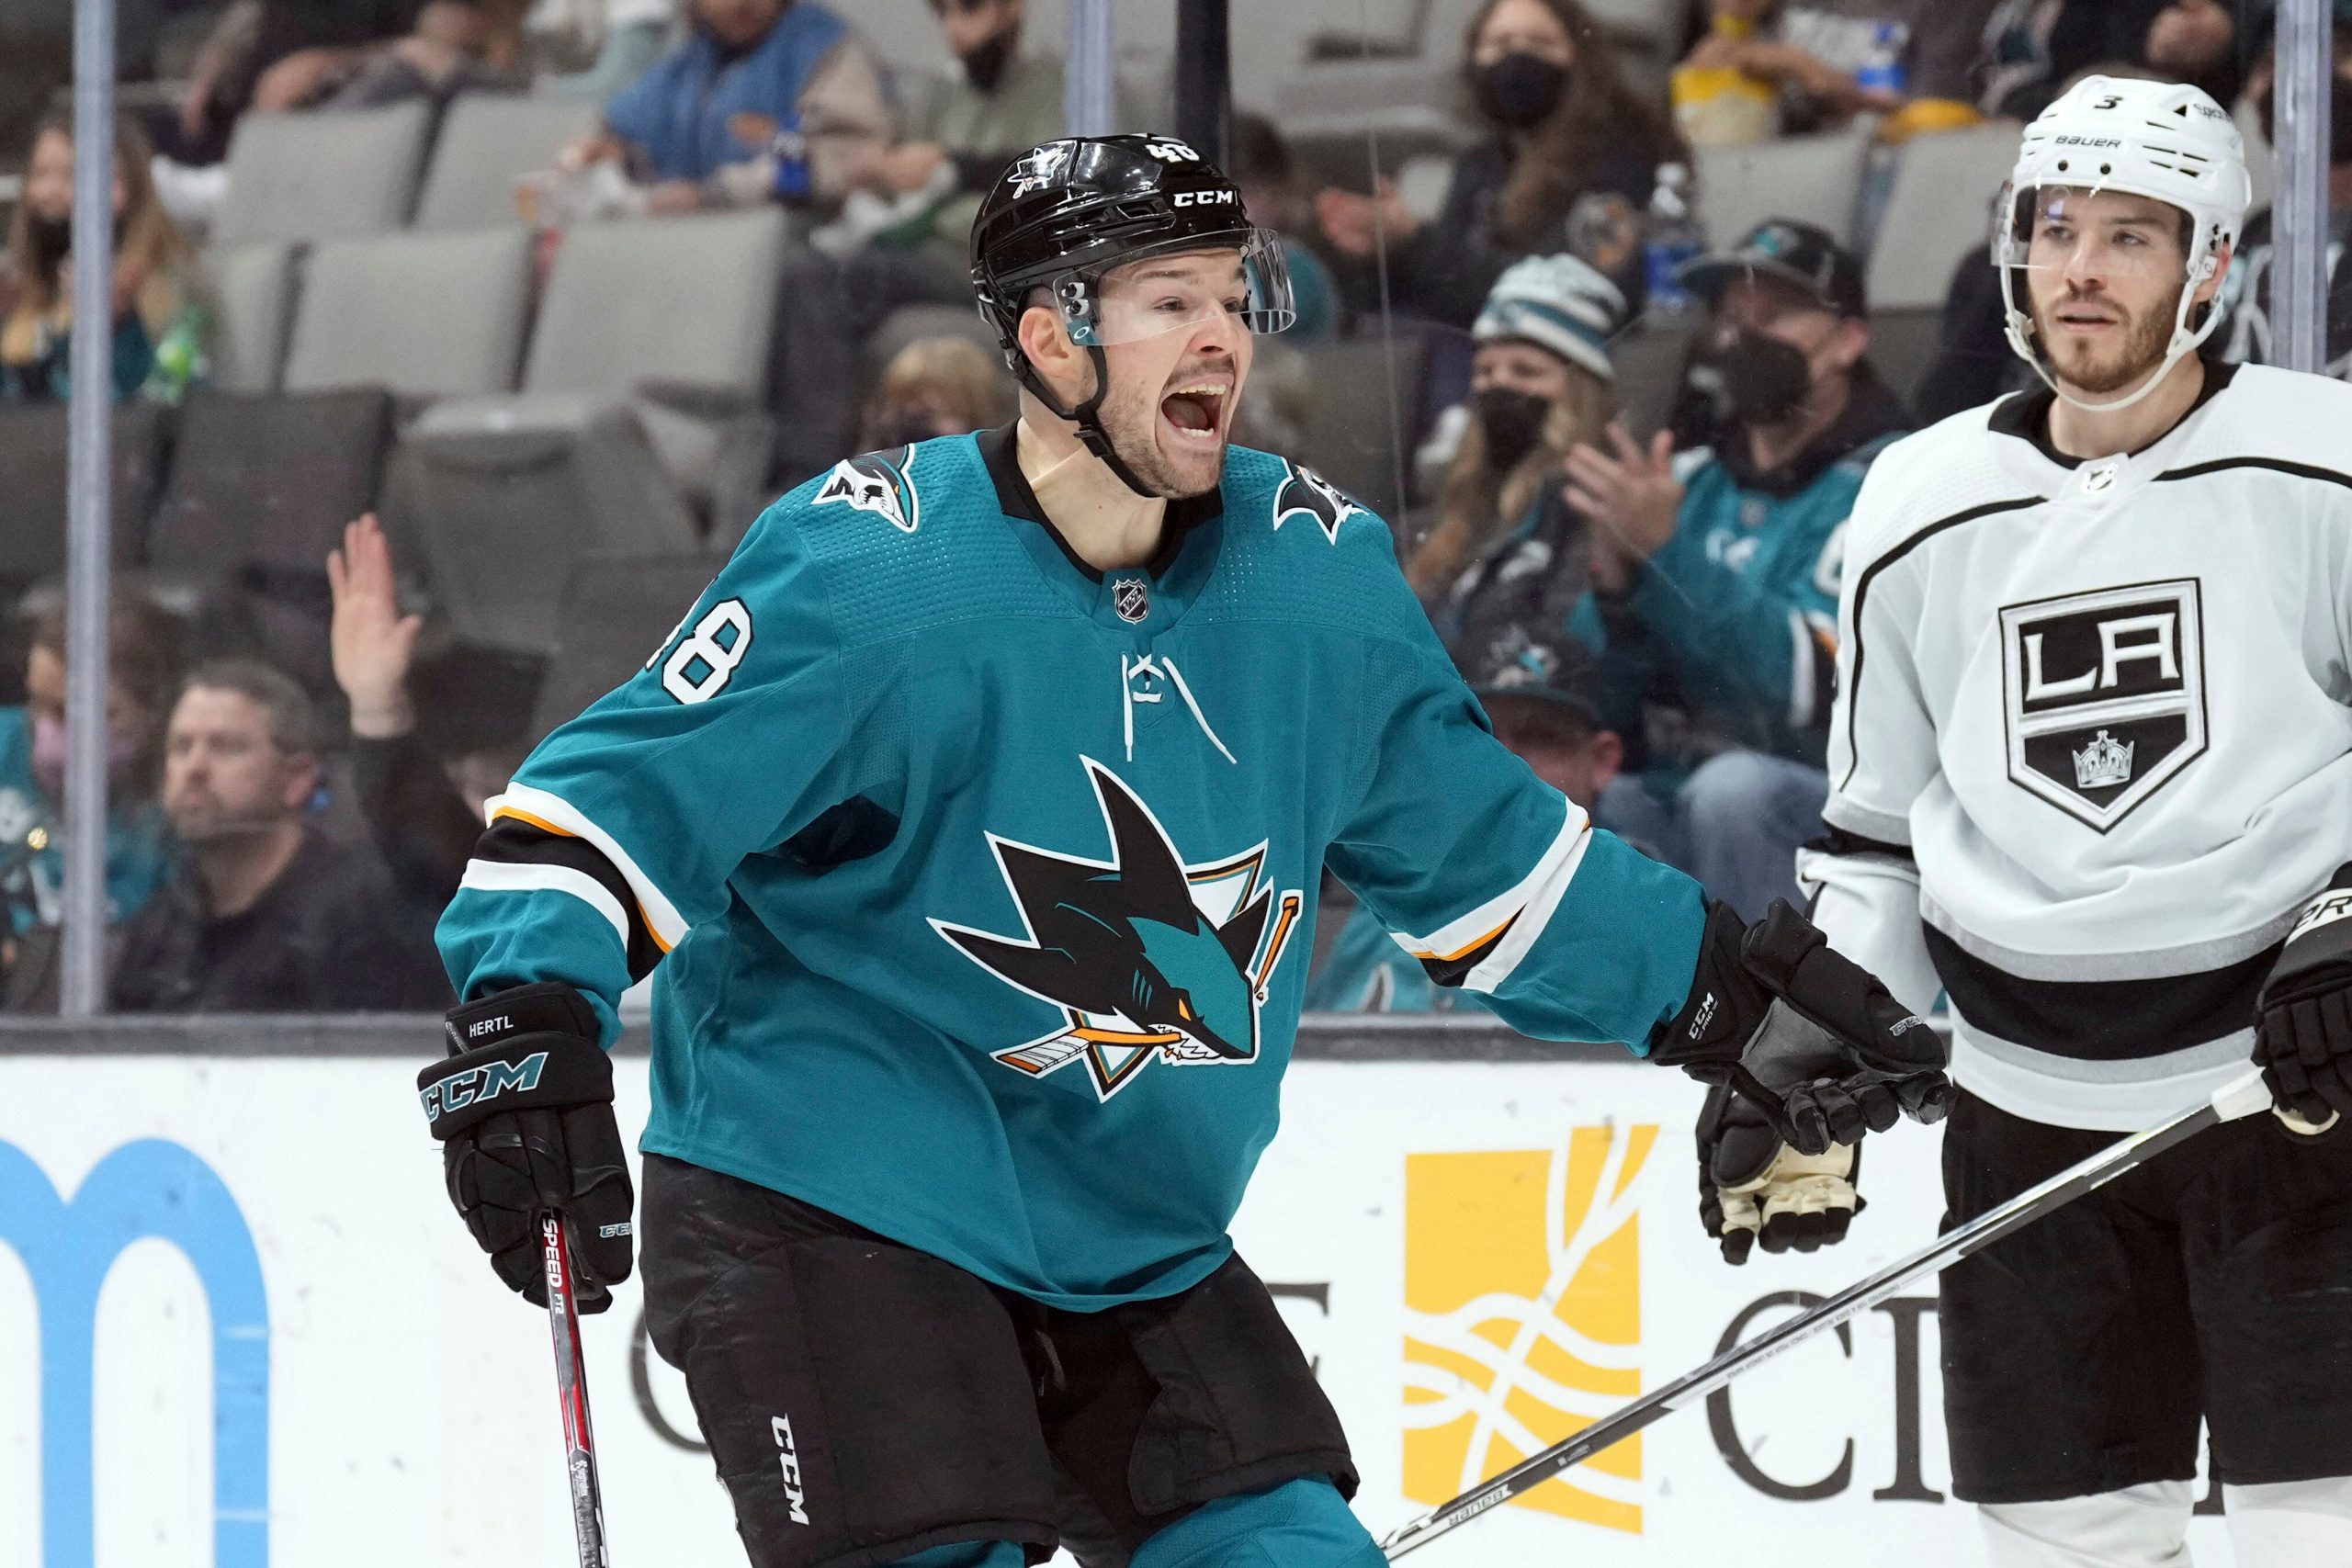 Timo Meier scores franchise-record 5 goals as Sharks rout Kings